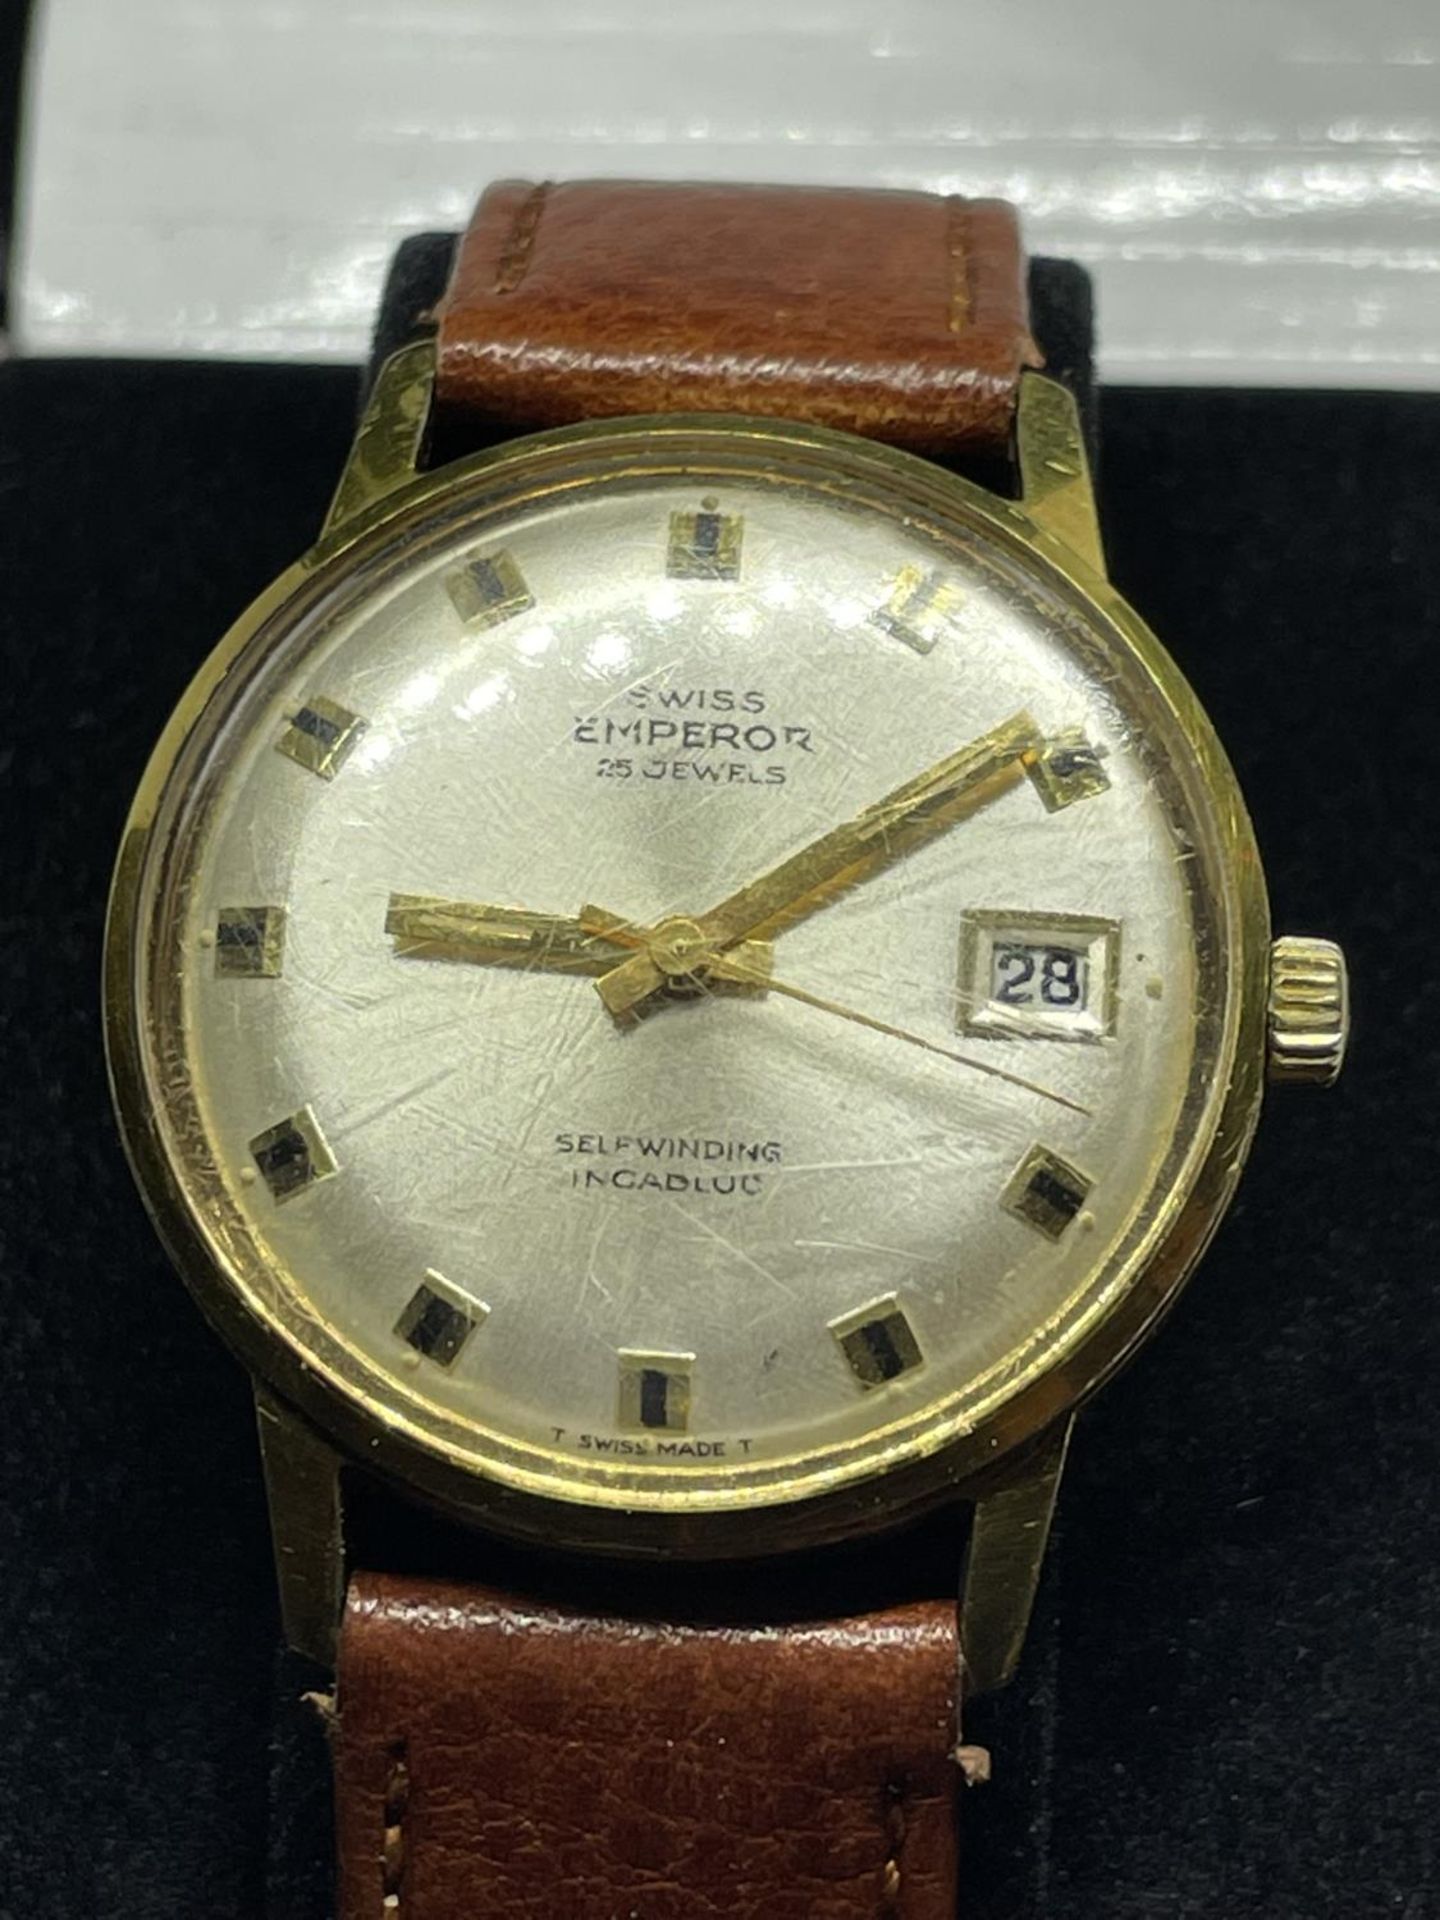 A VINTAGE EMPEROR 25 JEWELS WRIST WATCH SELF WINDING INCABLOC IN A PRESENTATION BOX - Image 2 of 2